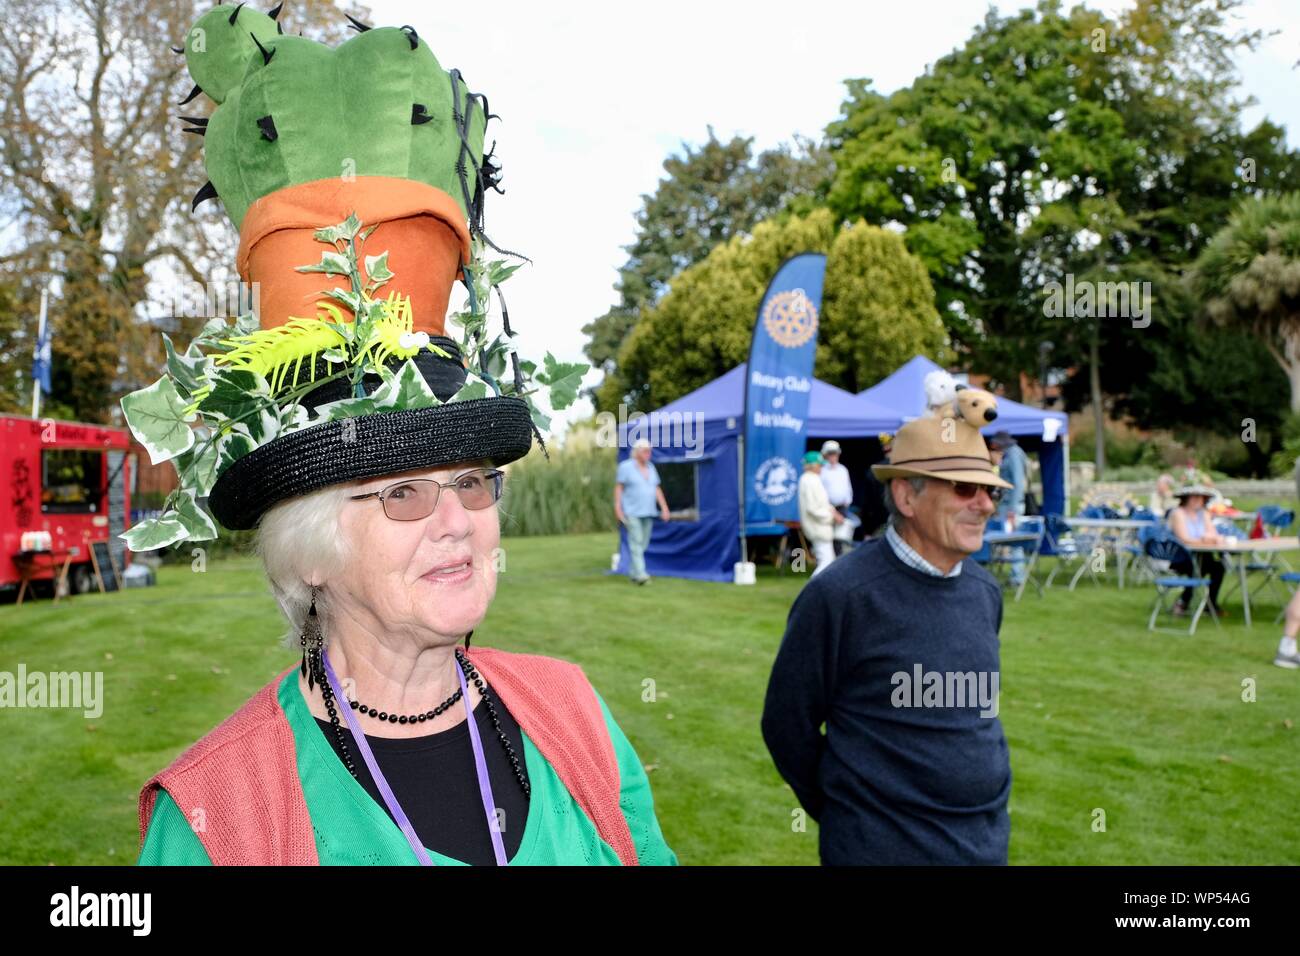 Bridport, Dorset, UK. 7 September 2019. Hat wearers of all types gather and promenade in Bridport. The annual Bridport Hat Festival encourages residents and visitors to take part in hat related activities and and competitions including best hats, best hatted dog, and best hatted couple and most elegant ensemble. Credit: Tom Corban/Alamy Live News Stock Photo